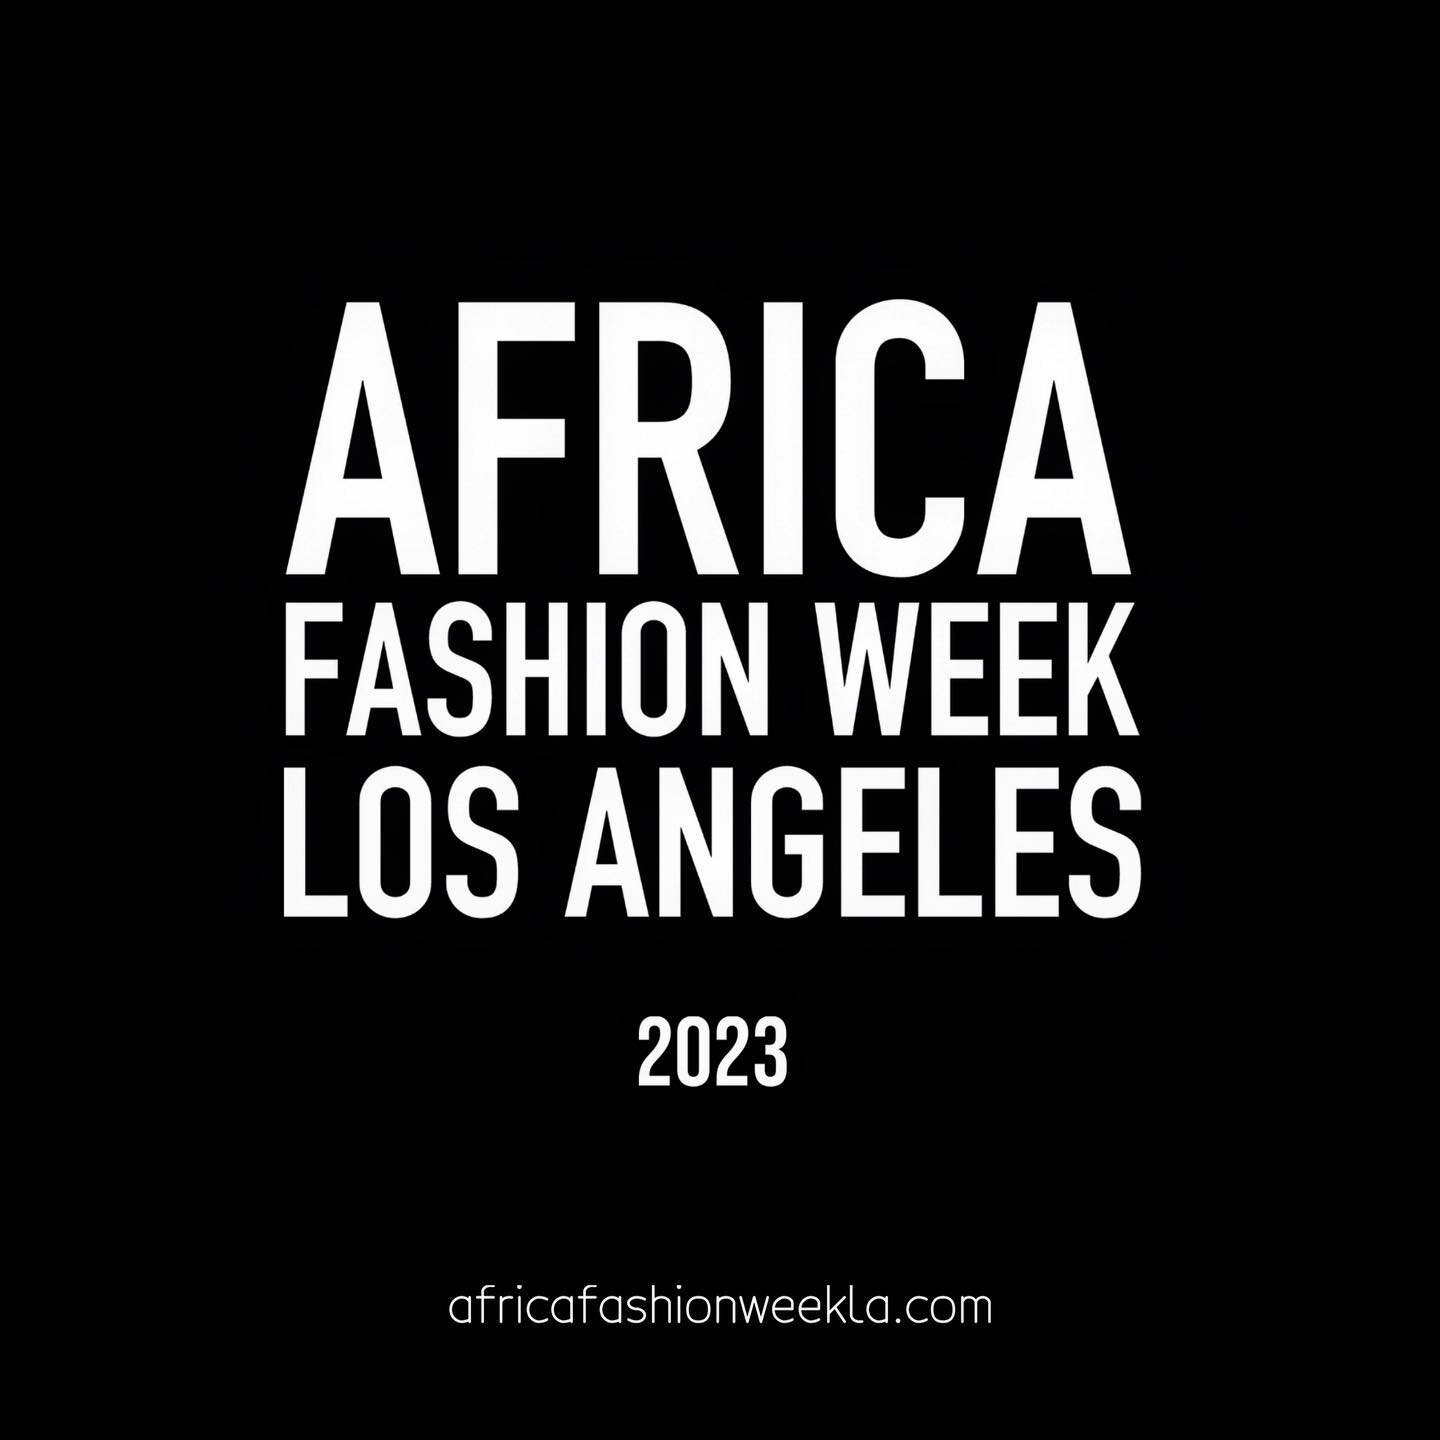 It&rsquo;s been a long time, but AFWLA is coming back this fall &amp; we&rsquo;re so excited to celebrate bringing 10yrs + of African Fashion to Los Angeles. 

Tag a designer that you&rsquo;d love to see show their collection at AFWLA below 👇🏿👇🏿?